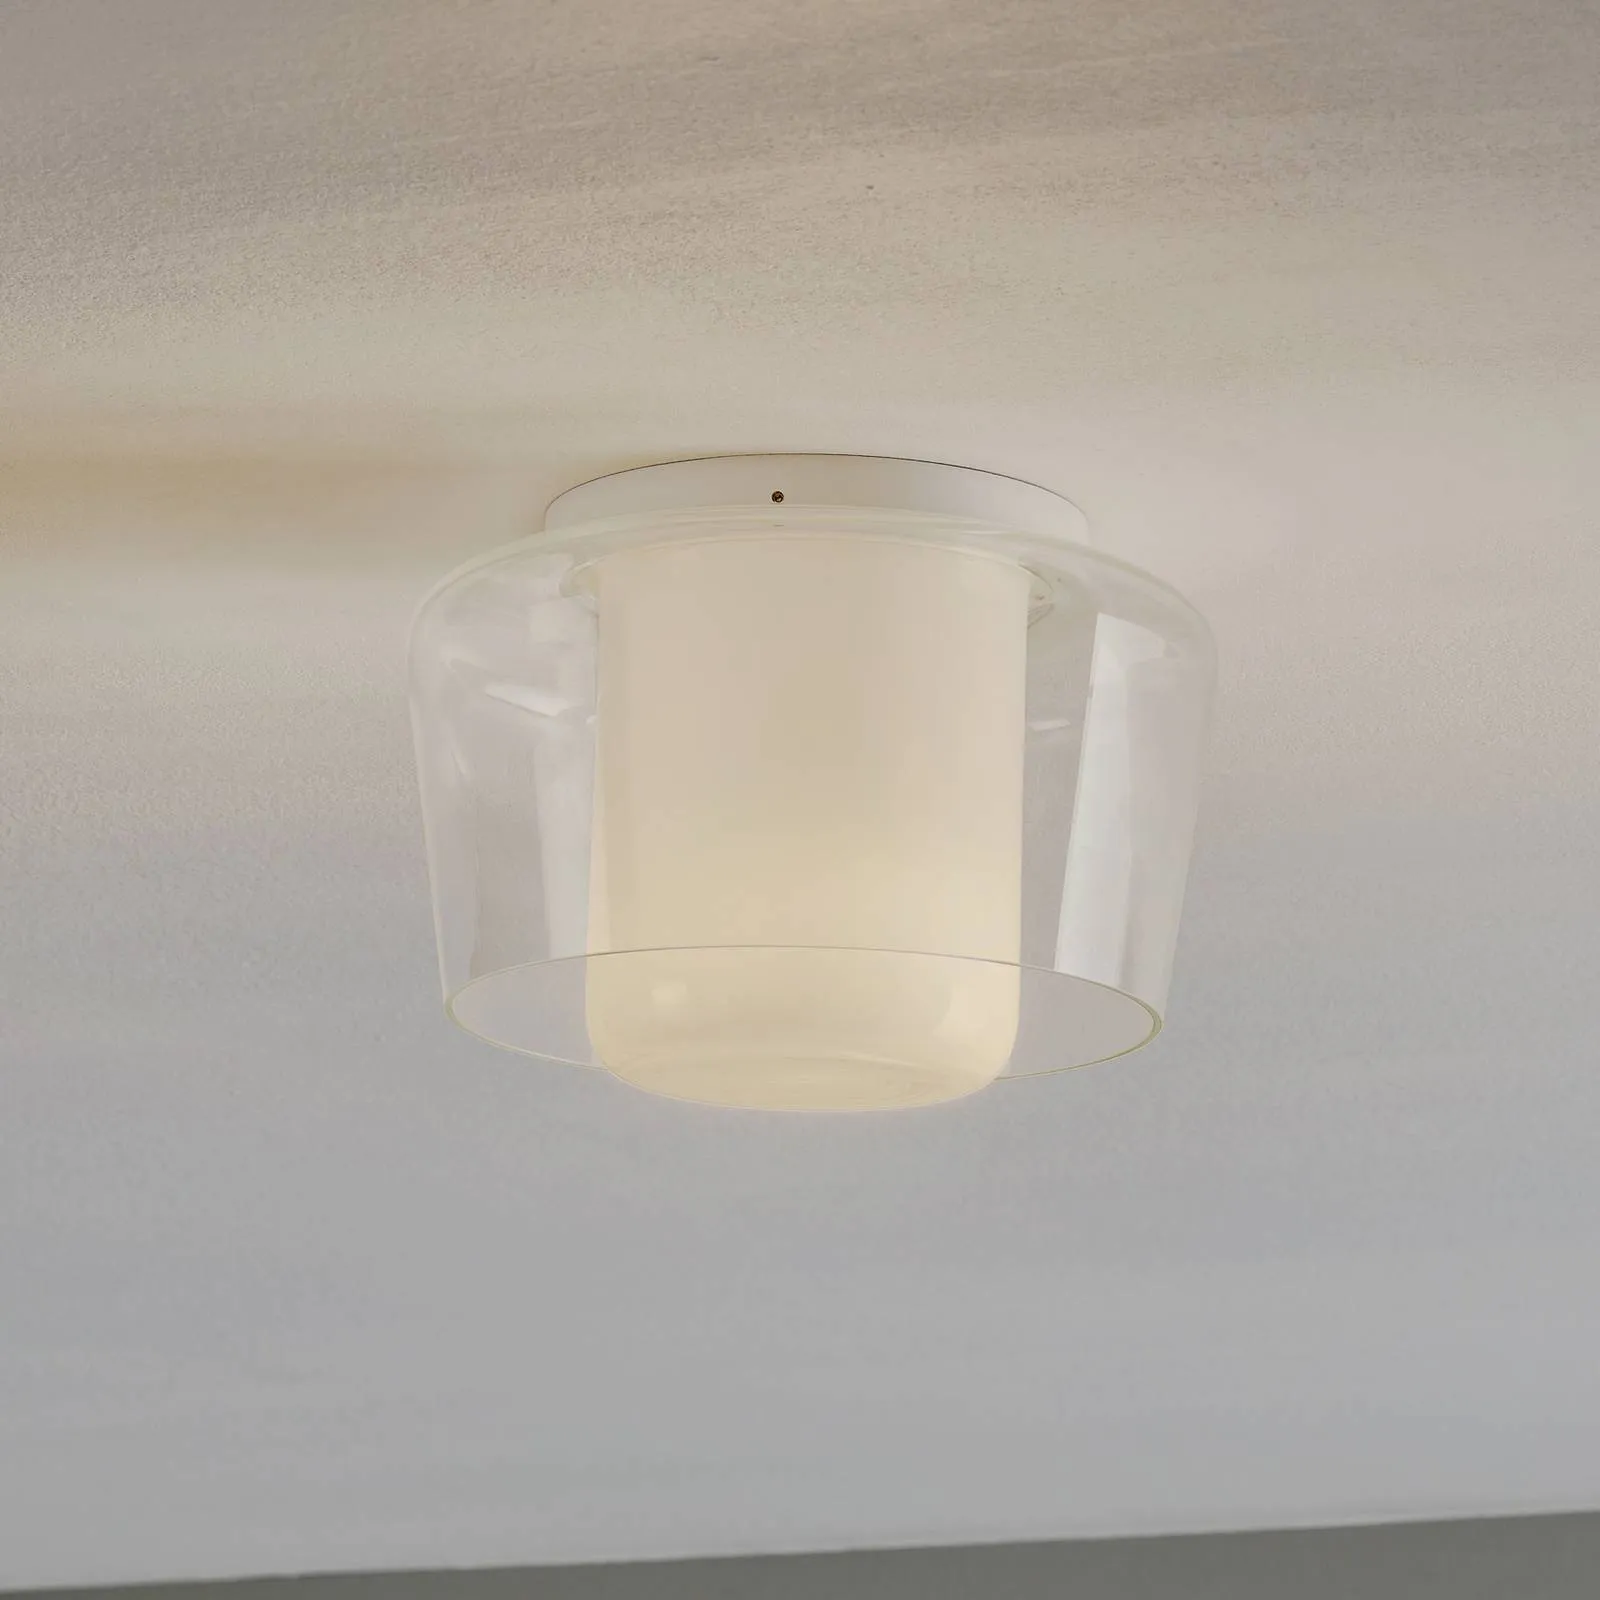 Helestra Canio glass ceiling light, clear outside